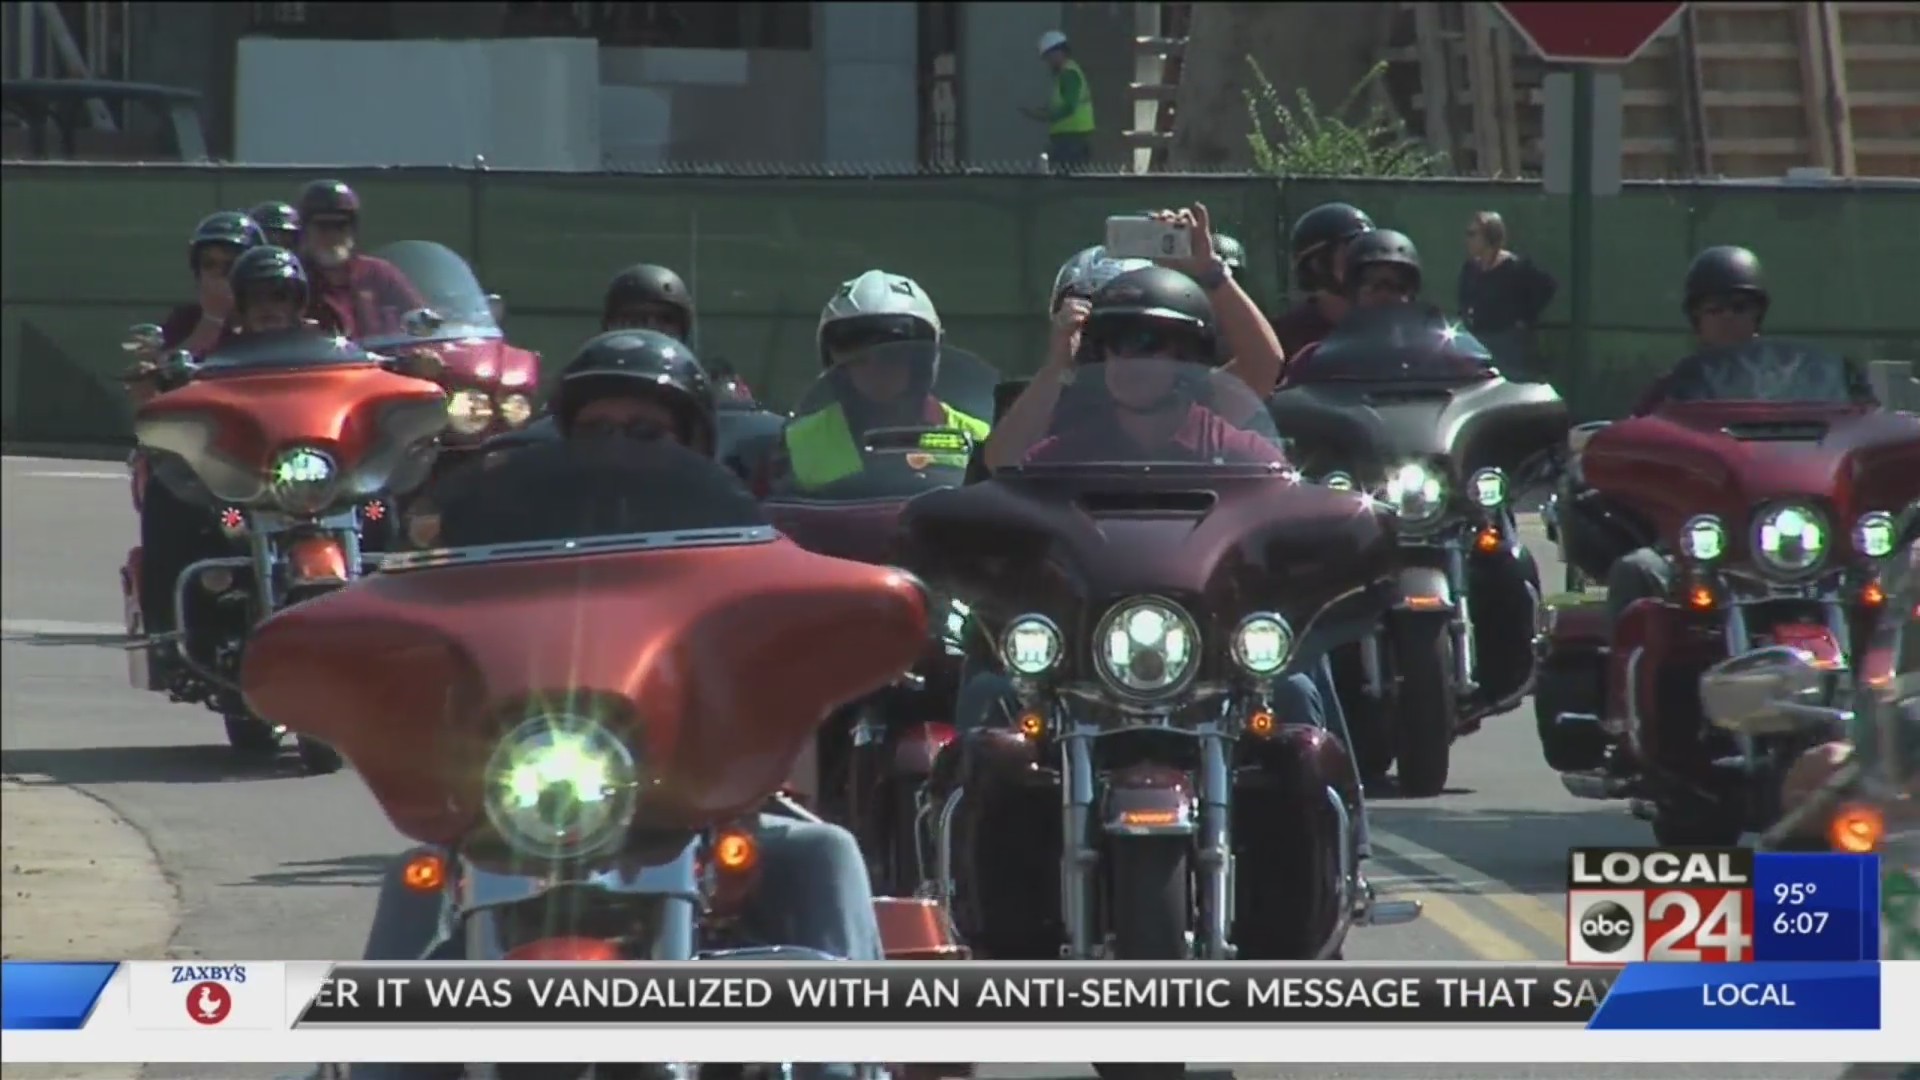 Live to ride, so they can live: Motorcycle group presents big donation to St. Jude Children's Research Hospital